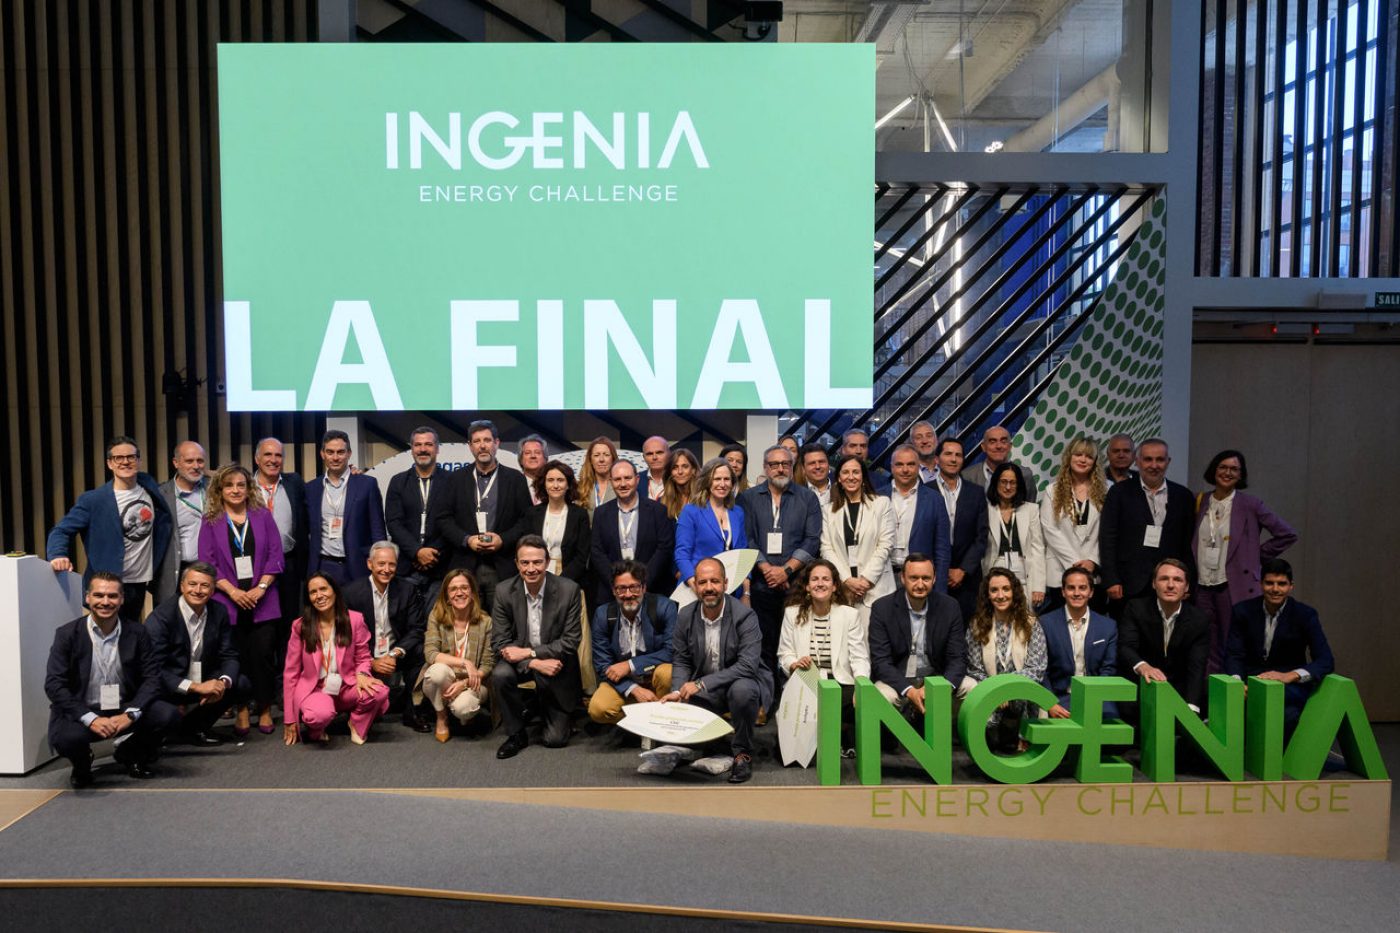 Group photo attendees THE FINAL: Ingenia Energy Challenge